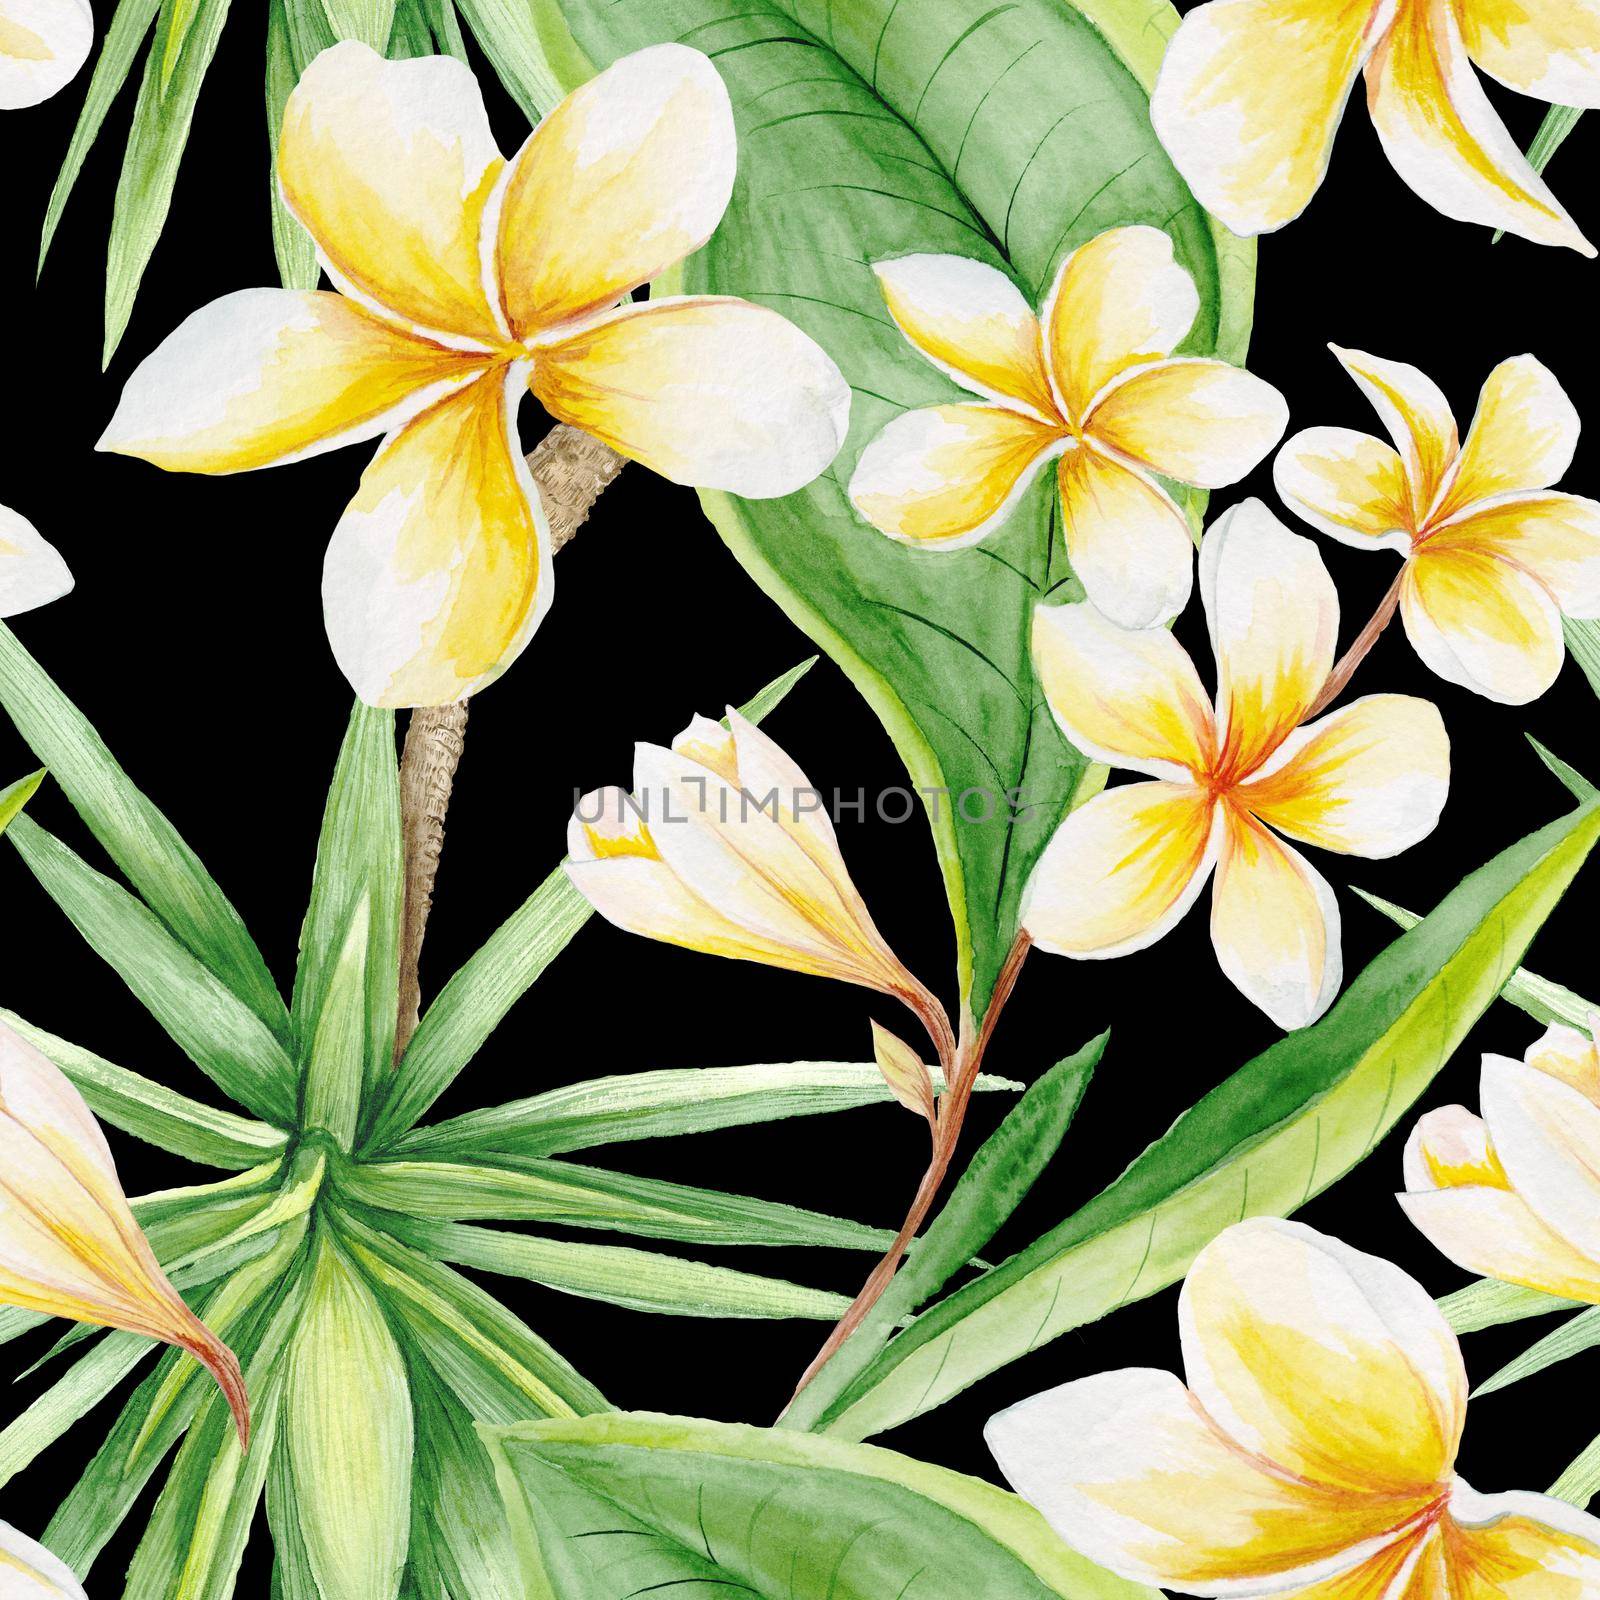 Travel hand-painted background with plumeria, frangipani flowers and yucca tree